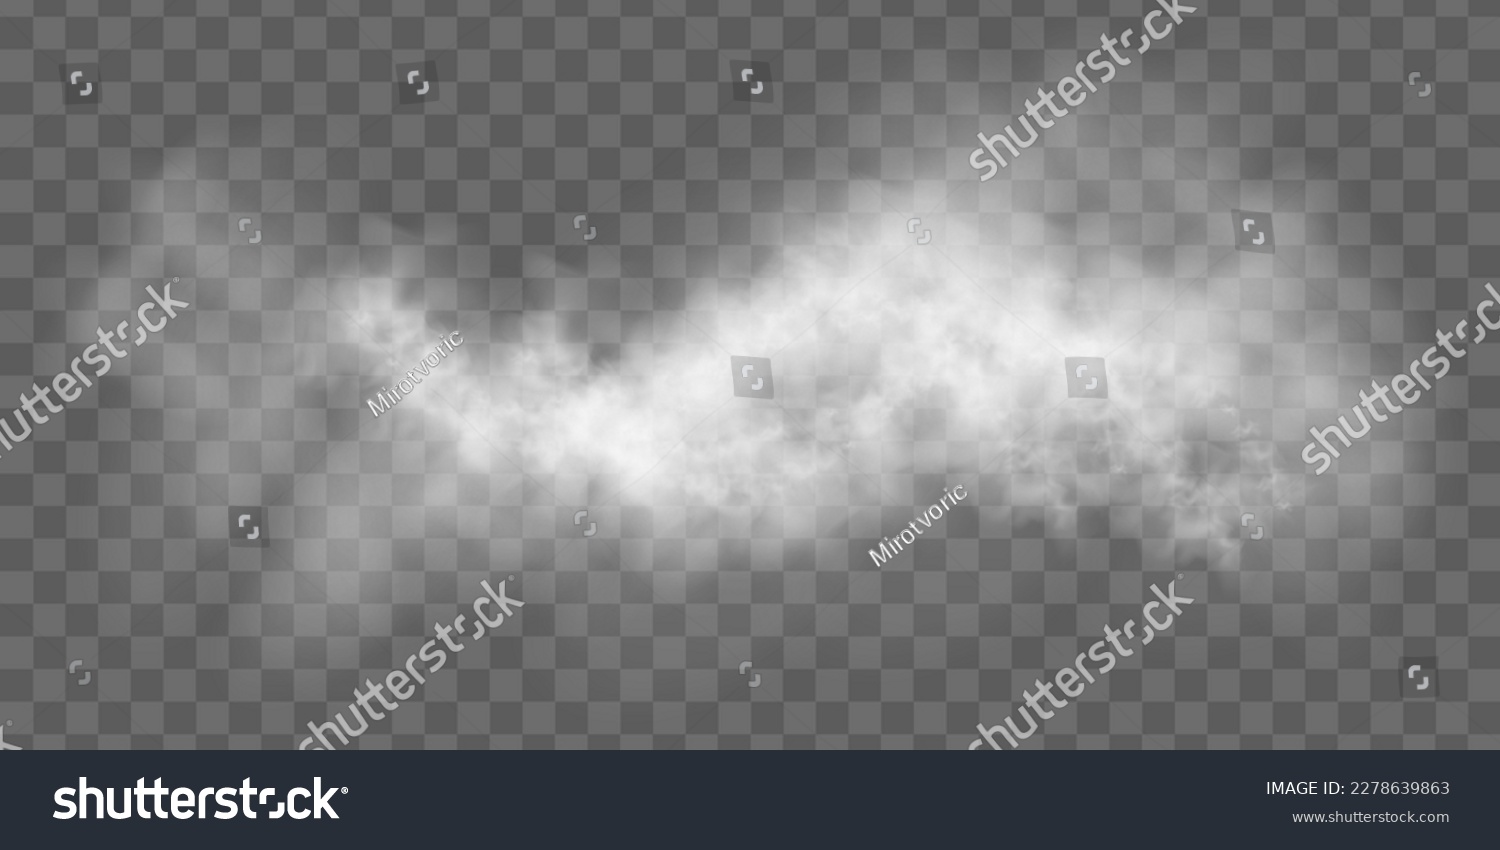 Special effect of steam, smoke, fog, clouds. Abstract gas on transparent background, vapor machine steam or explosion dust, dry ice effect, condensation, fume. Vector illustration.	 #2278639863